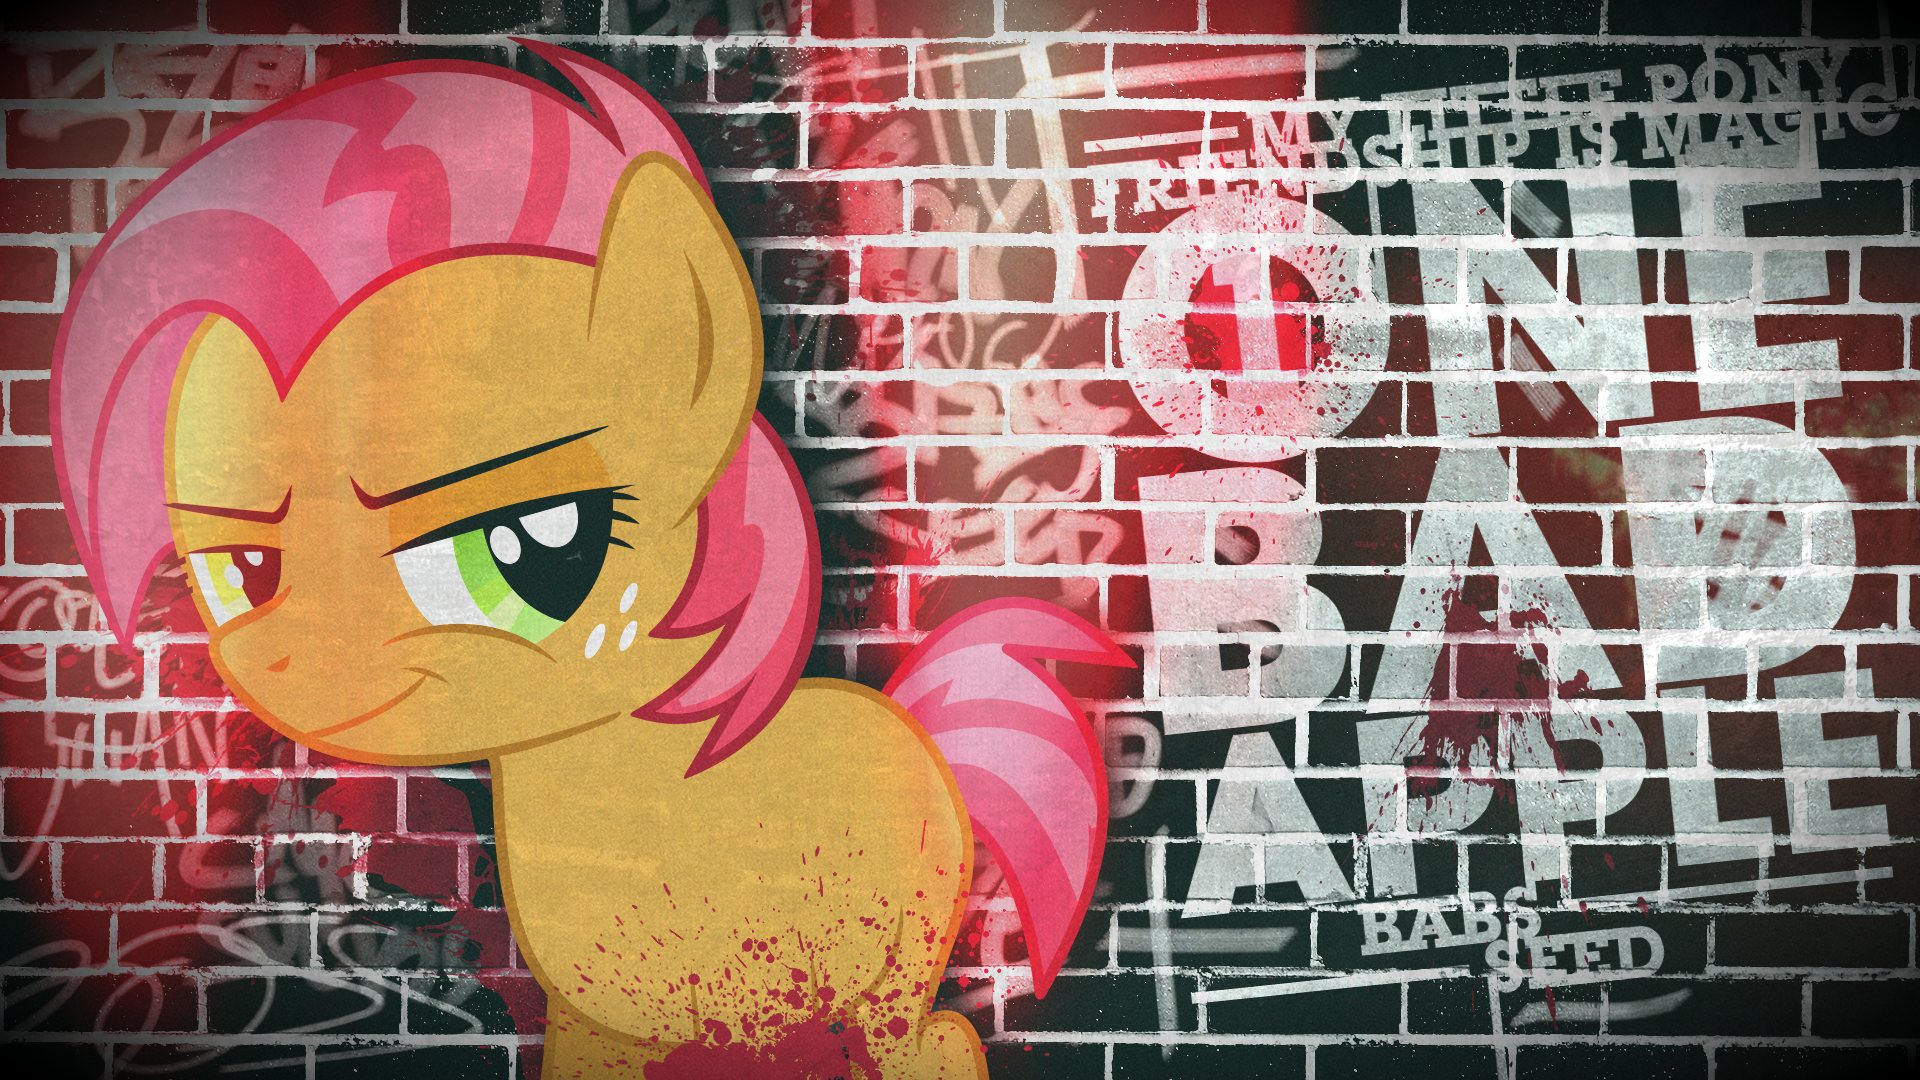 Babs Seed - One. Bad. Apple. (Wallpaper) by AproposResources, impala99 and MarelynManson